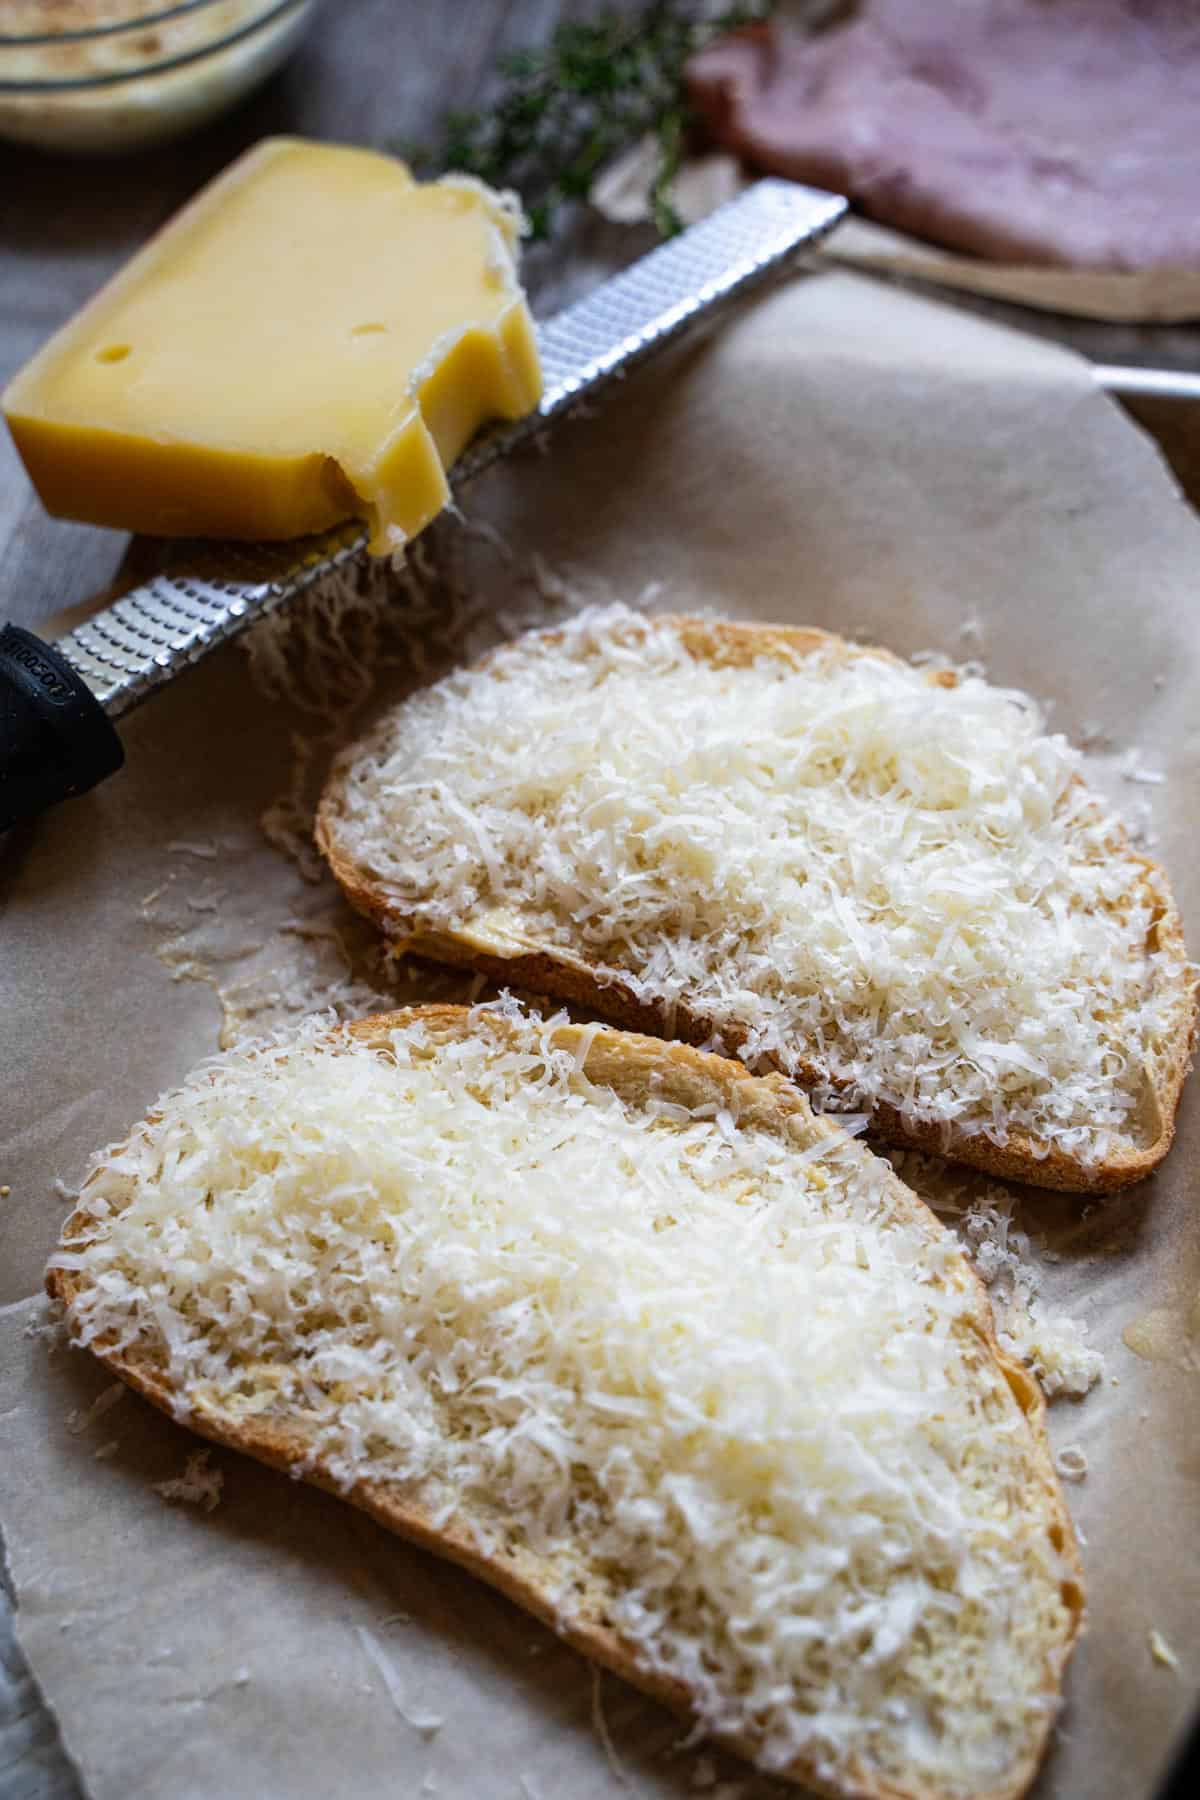 Grated cheese on 2 slices of bread